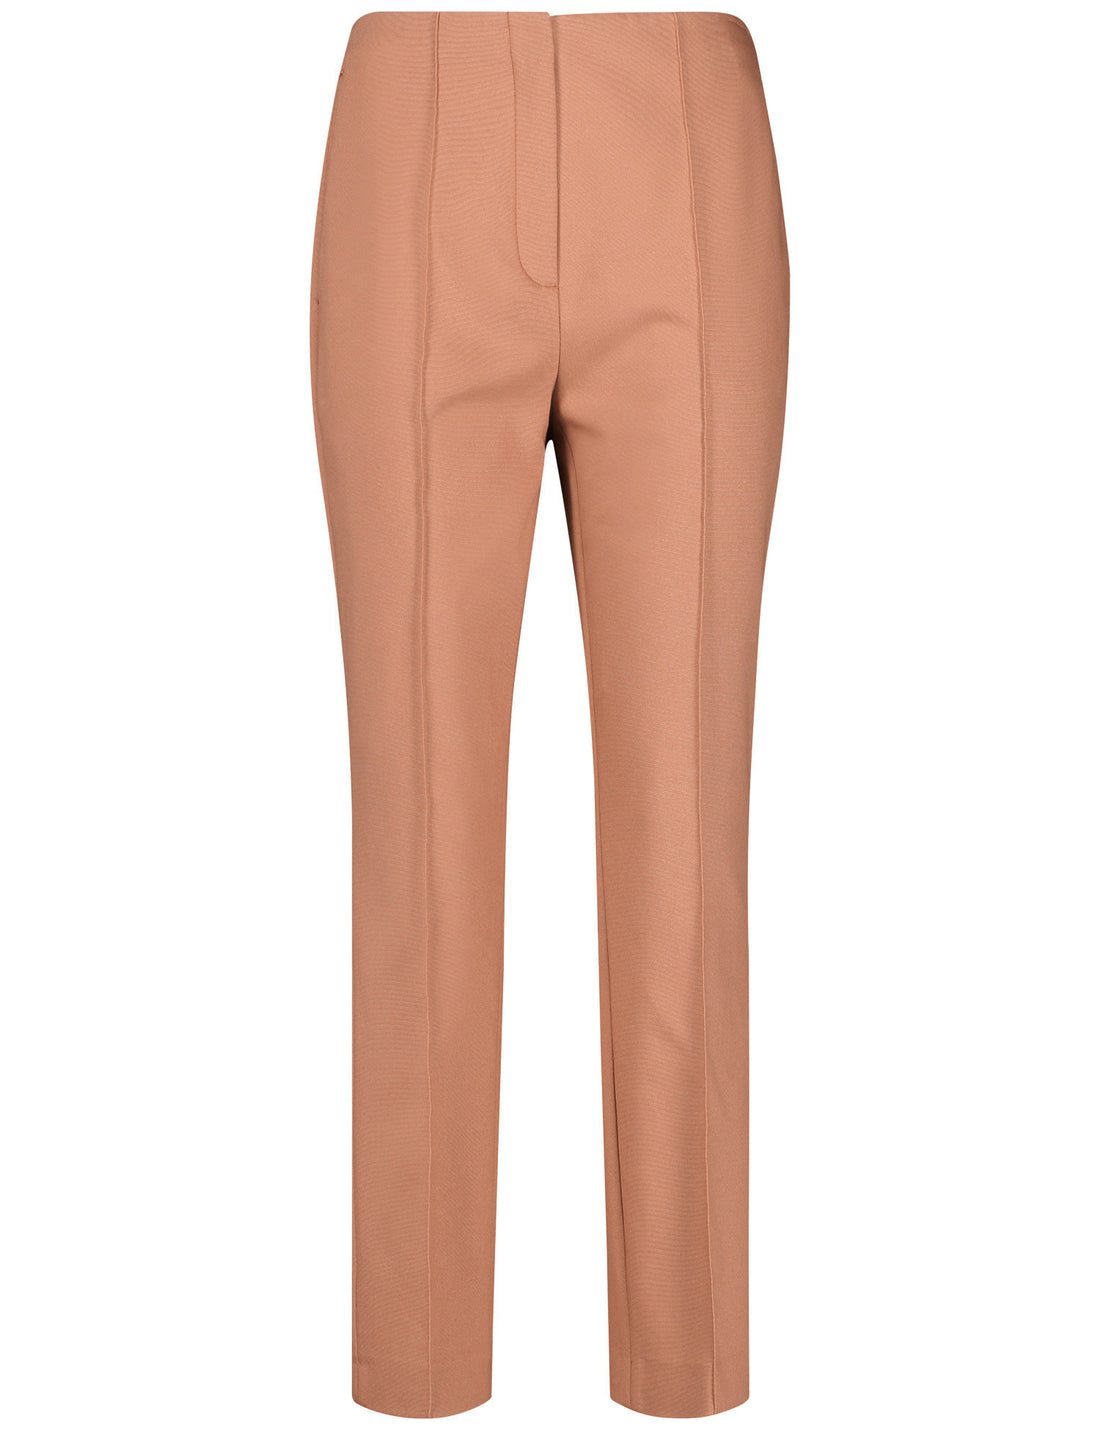 Trousers With Stretch For Comfort And Vertical Pintucks_320004-31334_70243_02